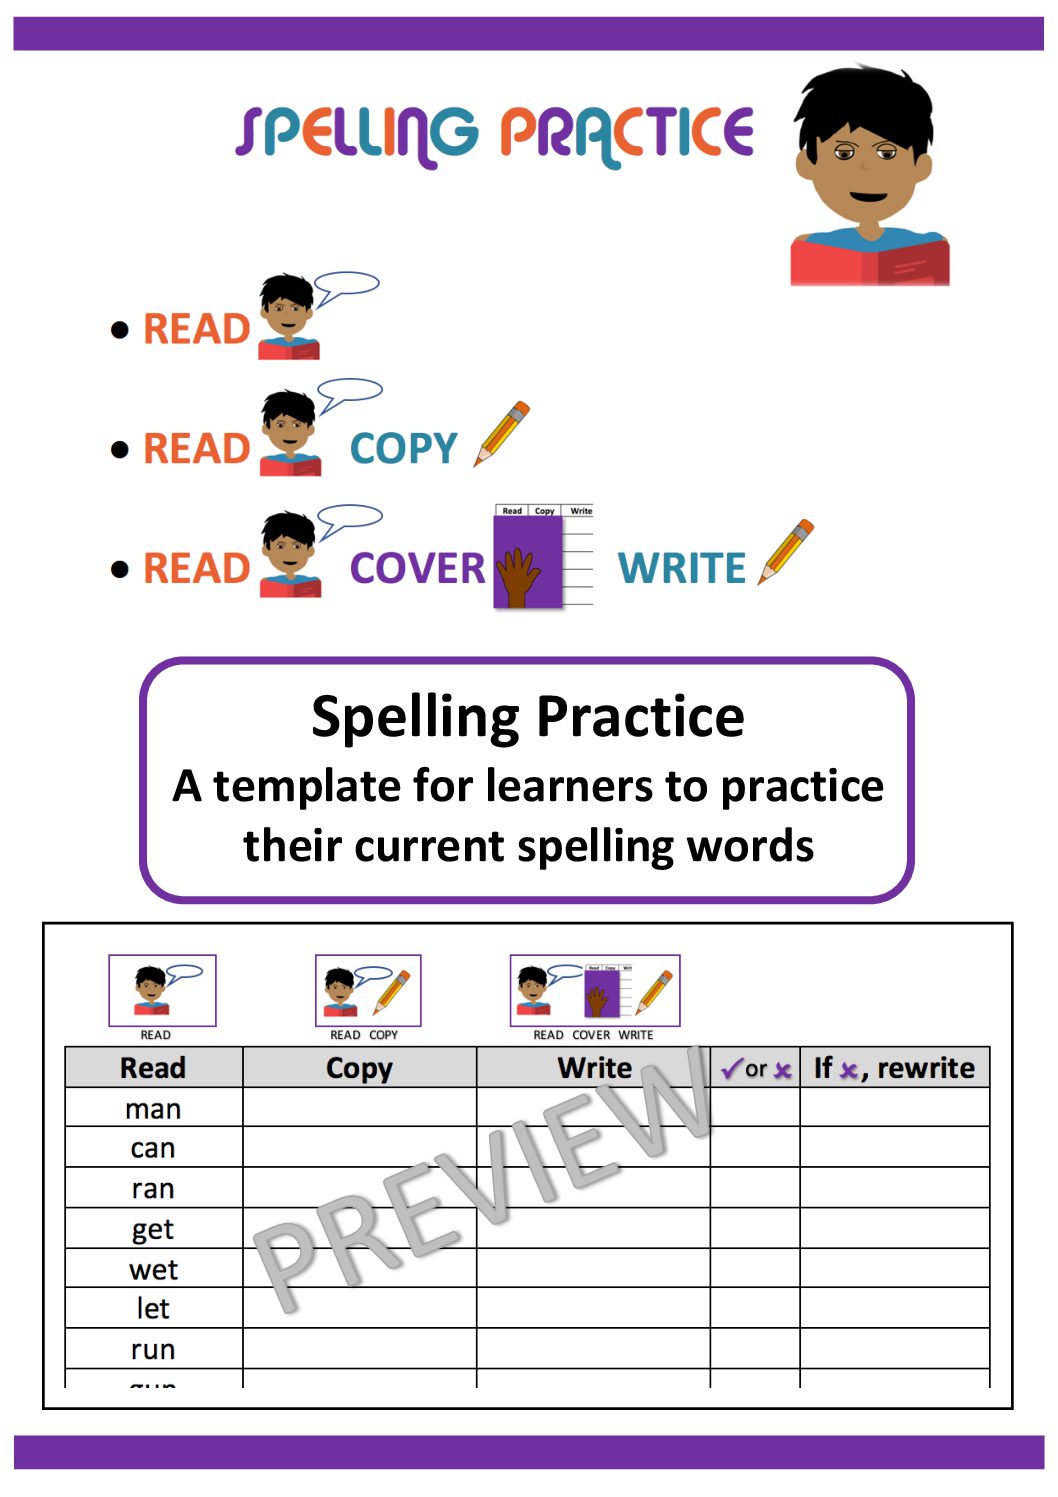 Spelling Practice Template Cover